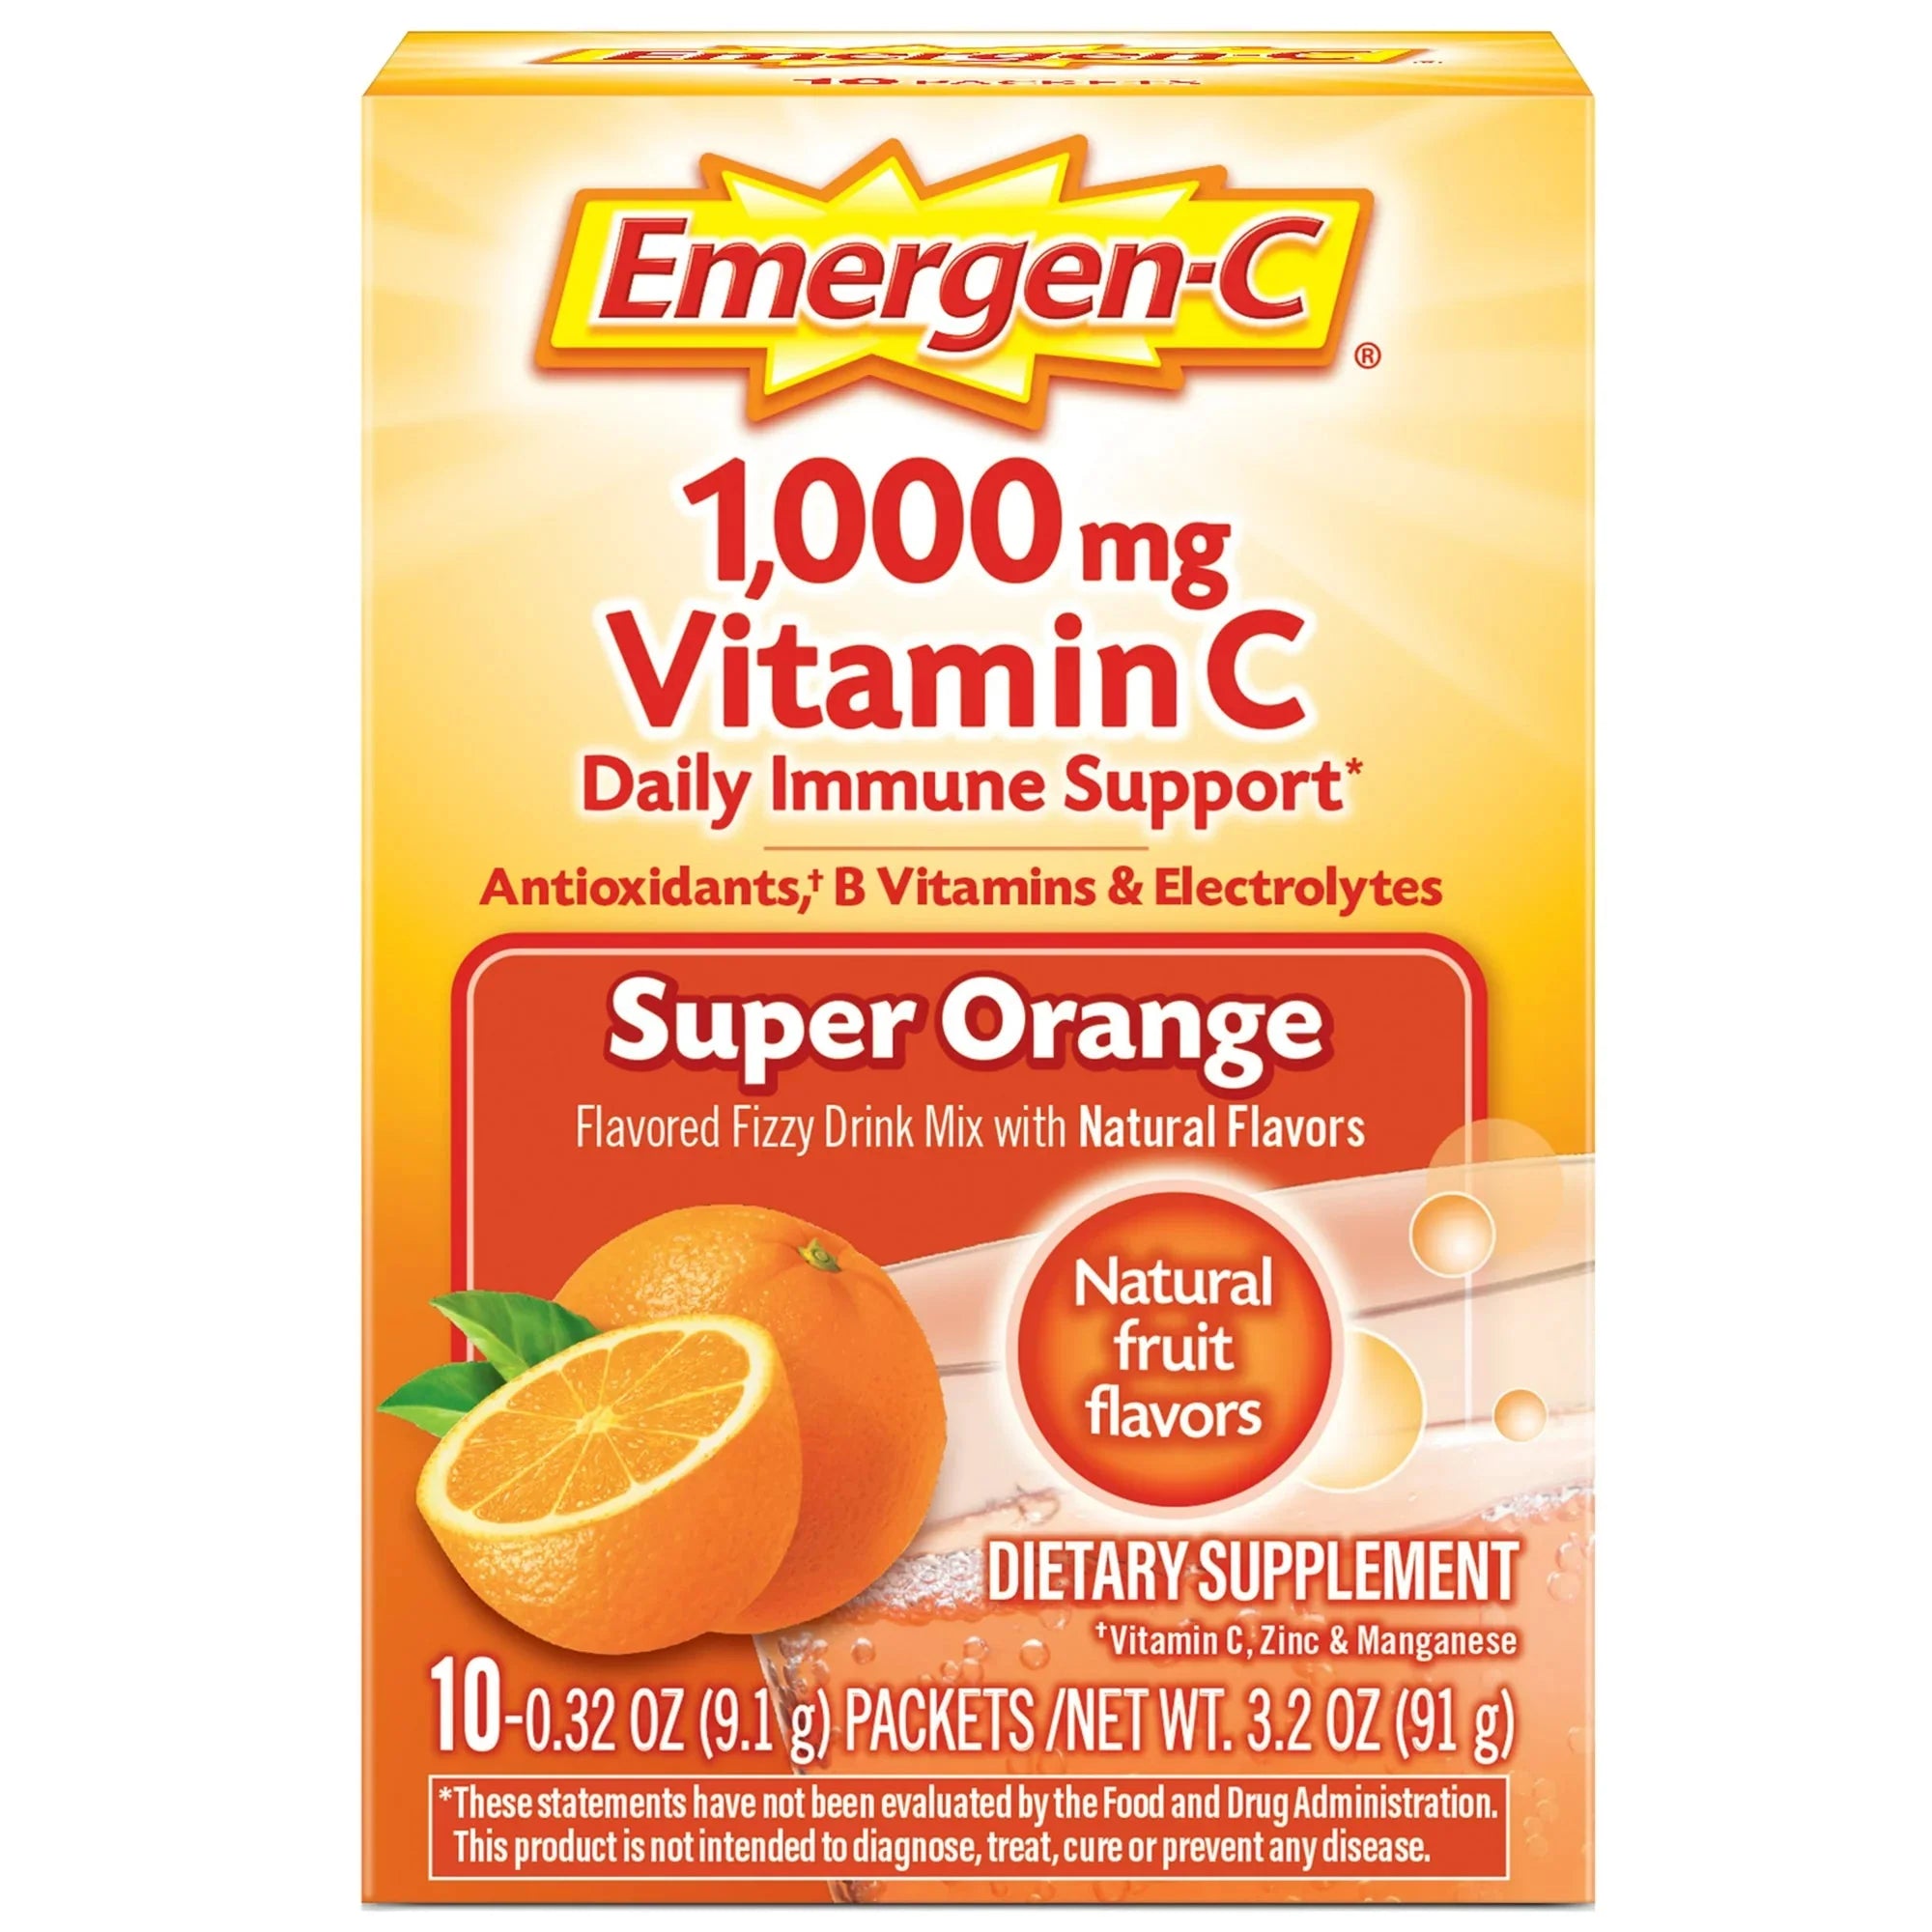 Wholesale prices with free shipping all over United States Emergen-C 1000mg Vitamin C Powder, with Antioxidants, B Vitamins and Electrolytes for Immune Support, Caffeine Free Vitamin C Supplement Fizzy Drink Mix, Super Orange Flavor - 10 Count - Steven Deals